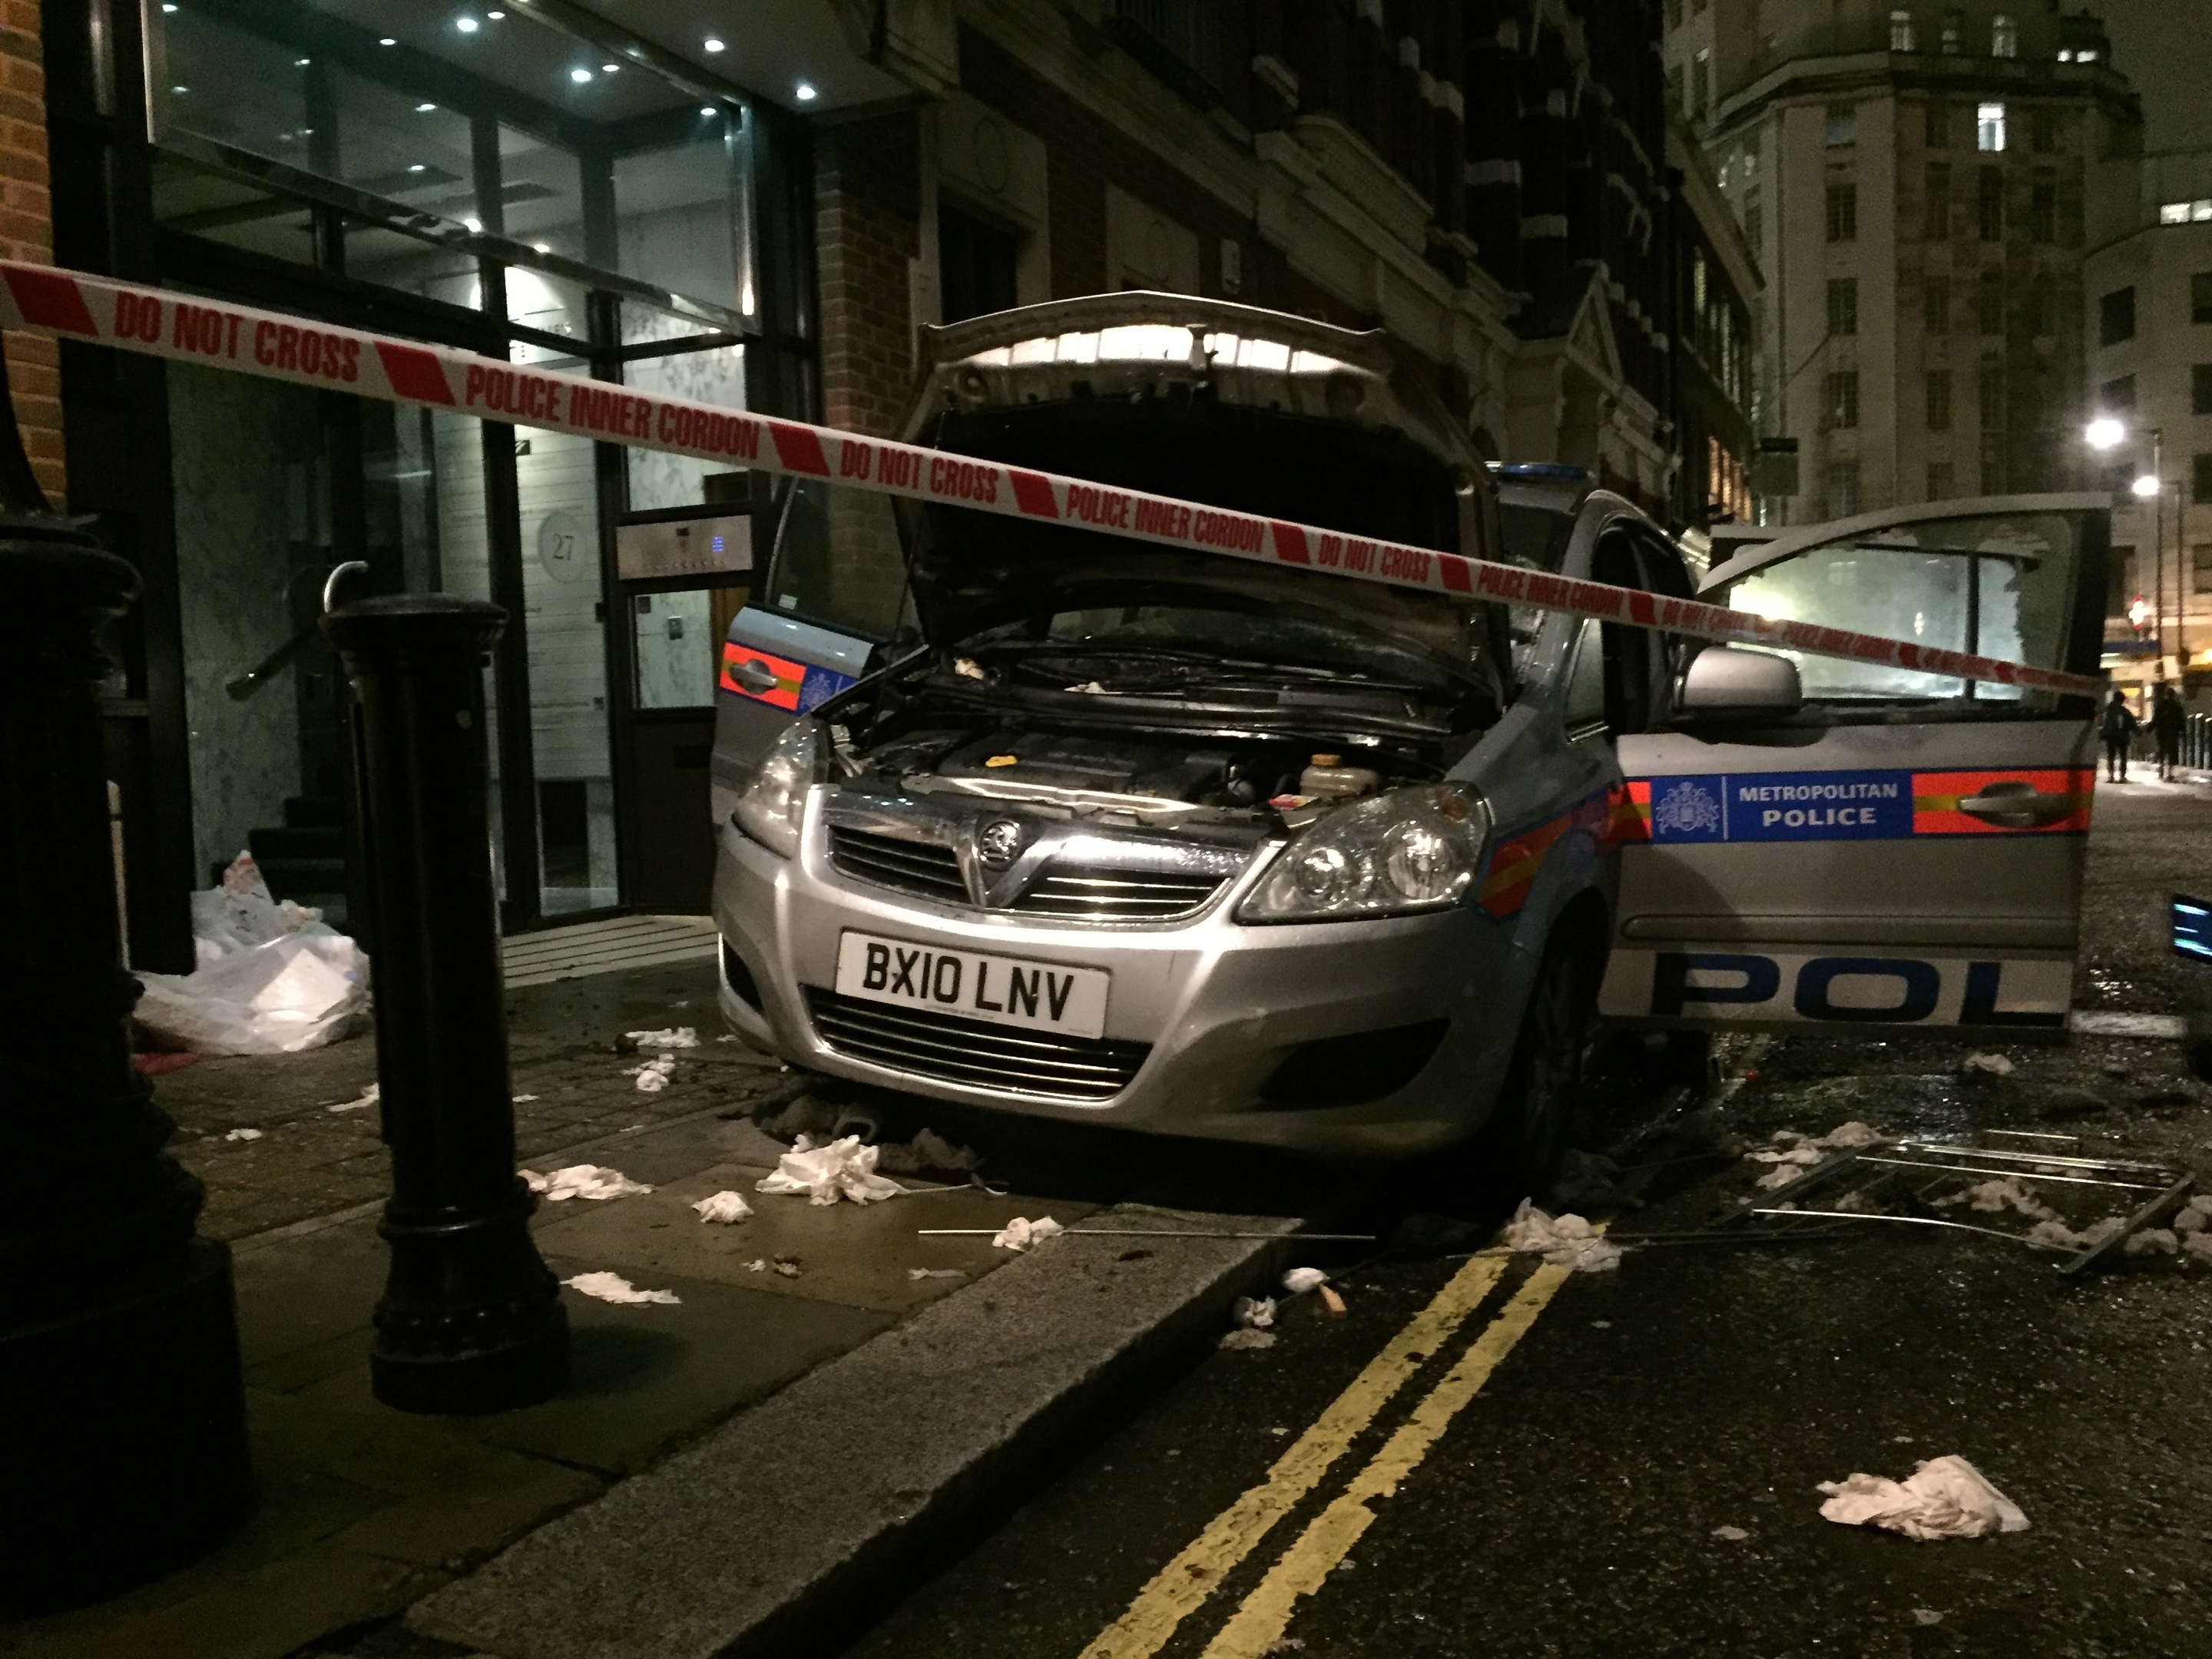 A vandalised police car on Queen Anne's Gate in central London, during the Million Mask March